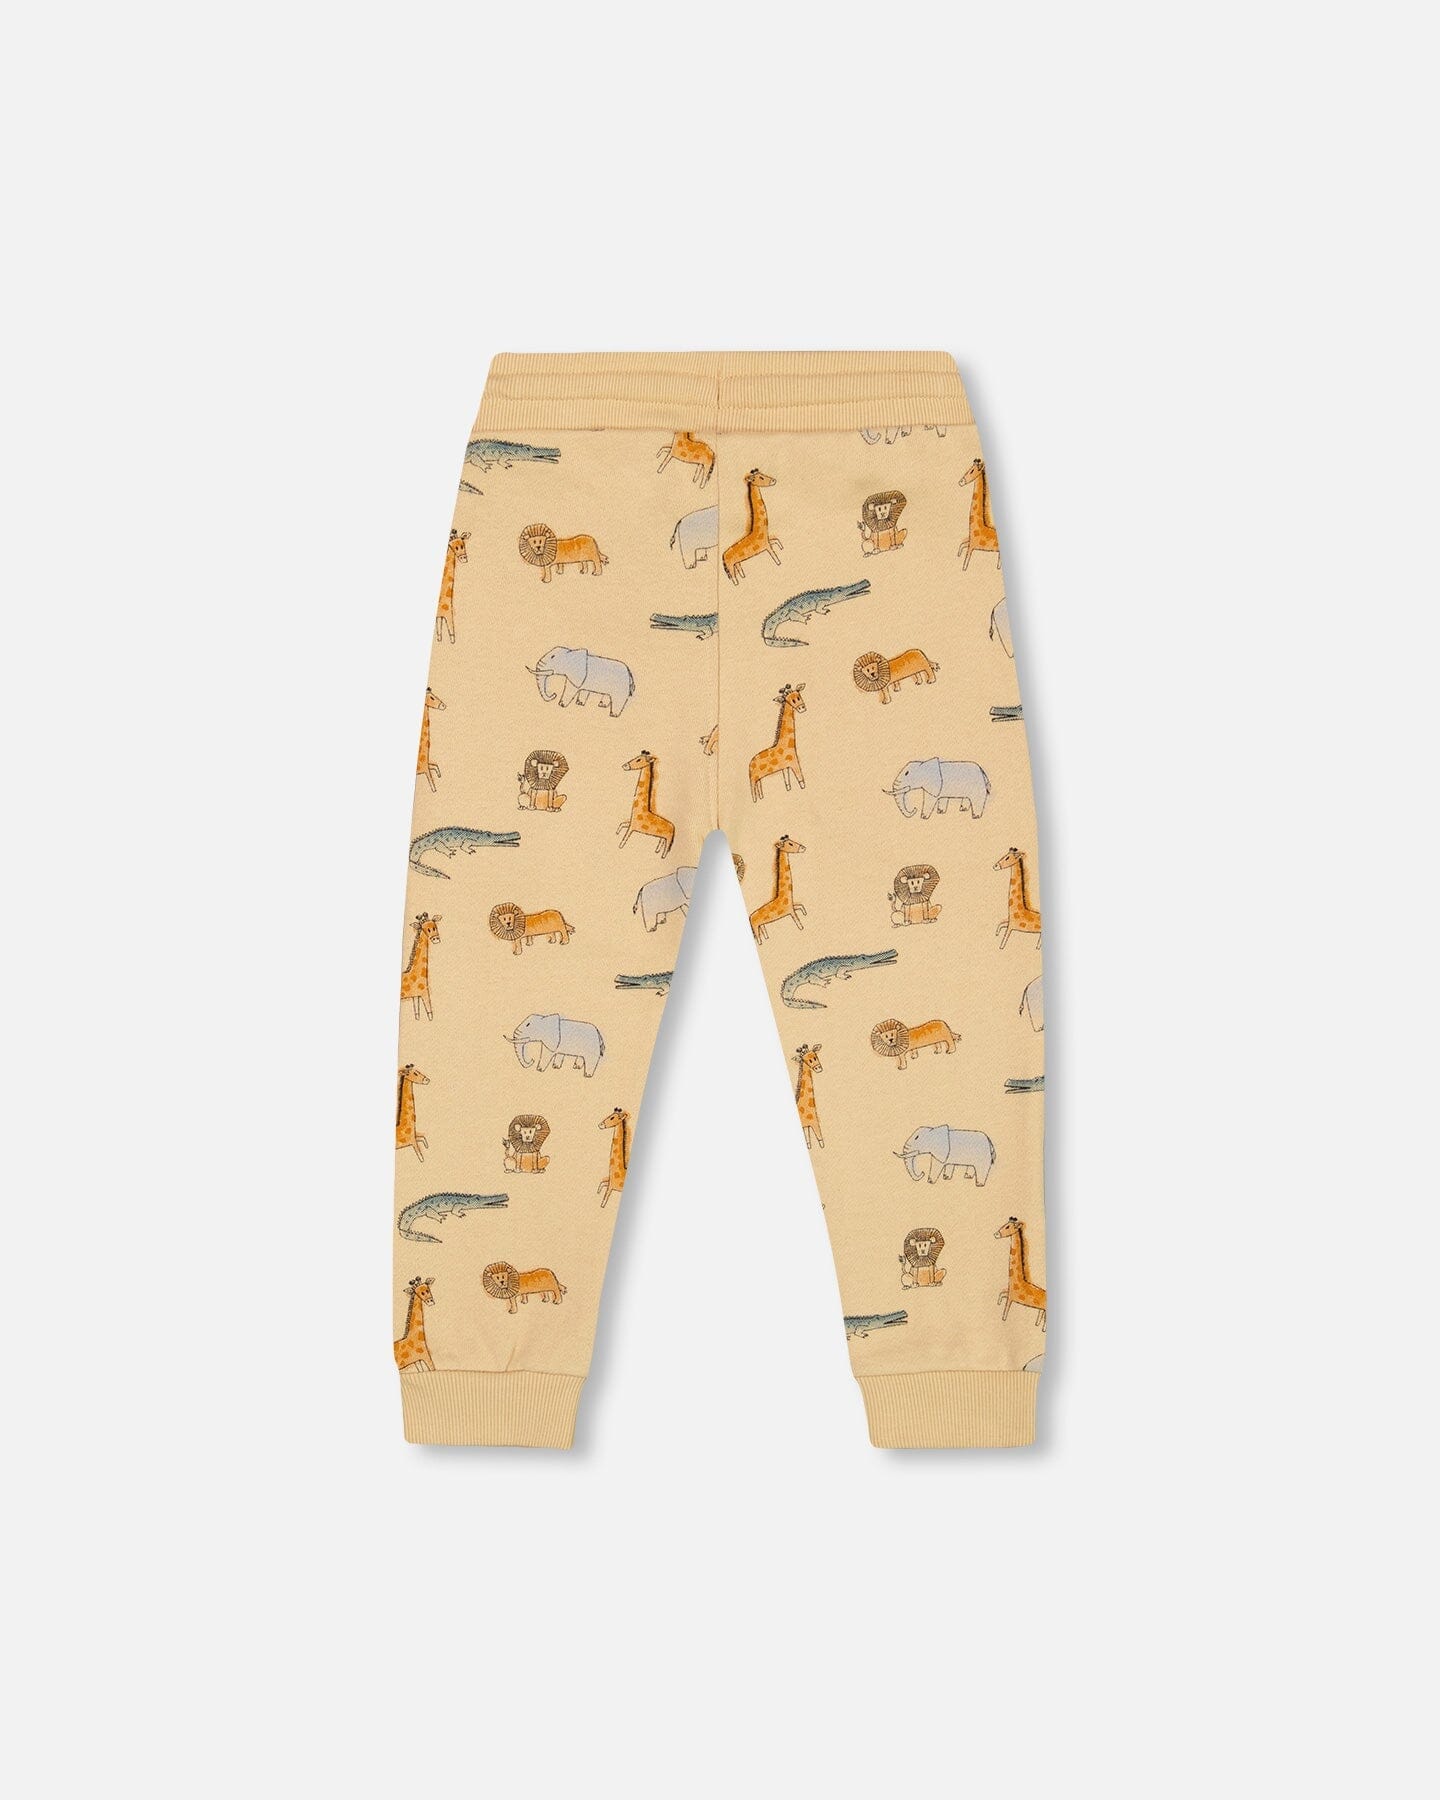 French Terry Sweatpants Beige Printed Jungle Animal - F30T20_096